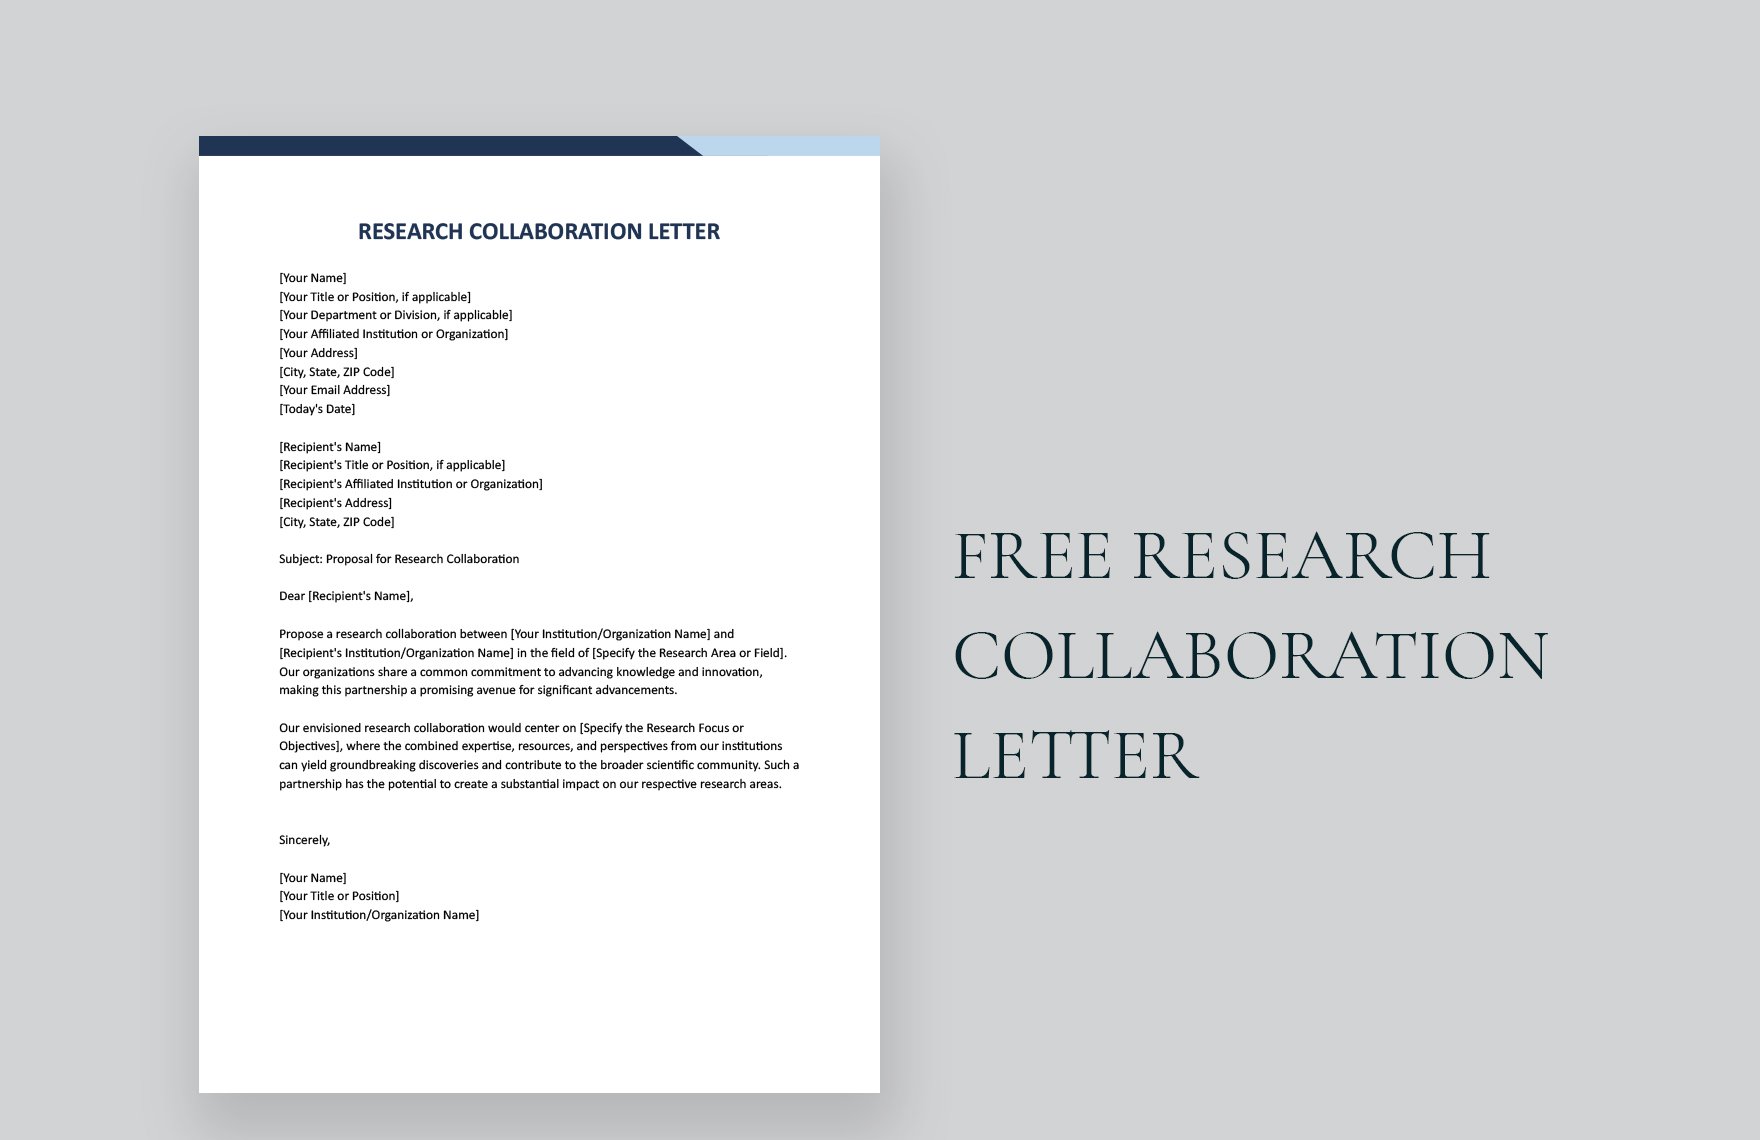 Free Research Collaboration Letter - Download in Word, Google Docs ...